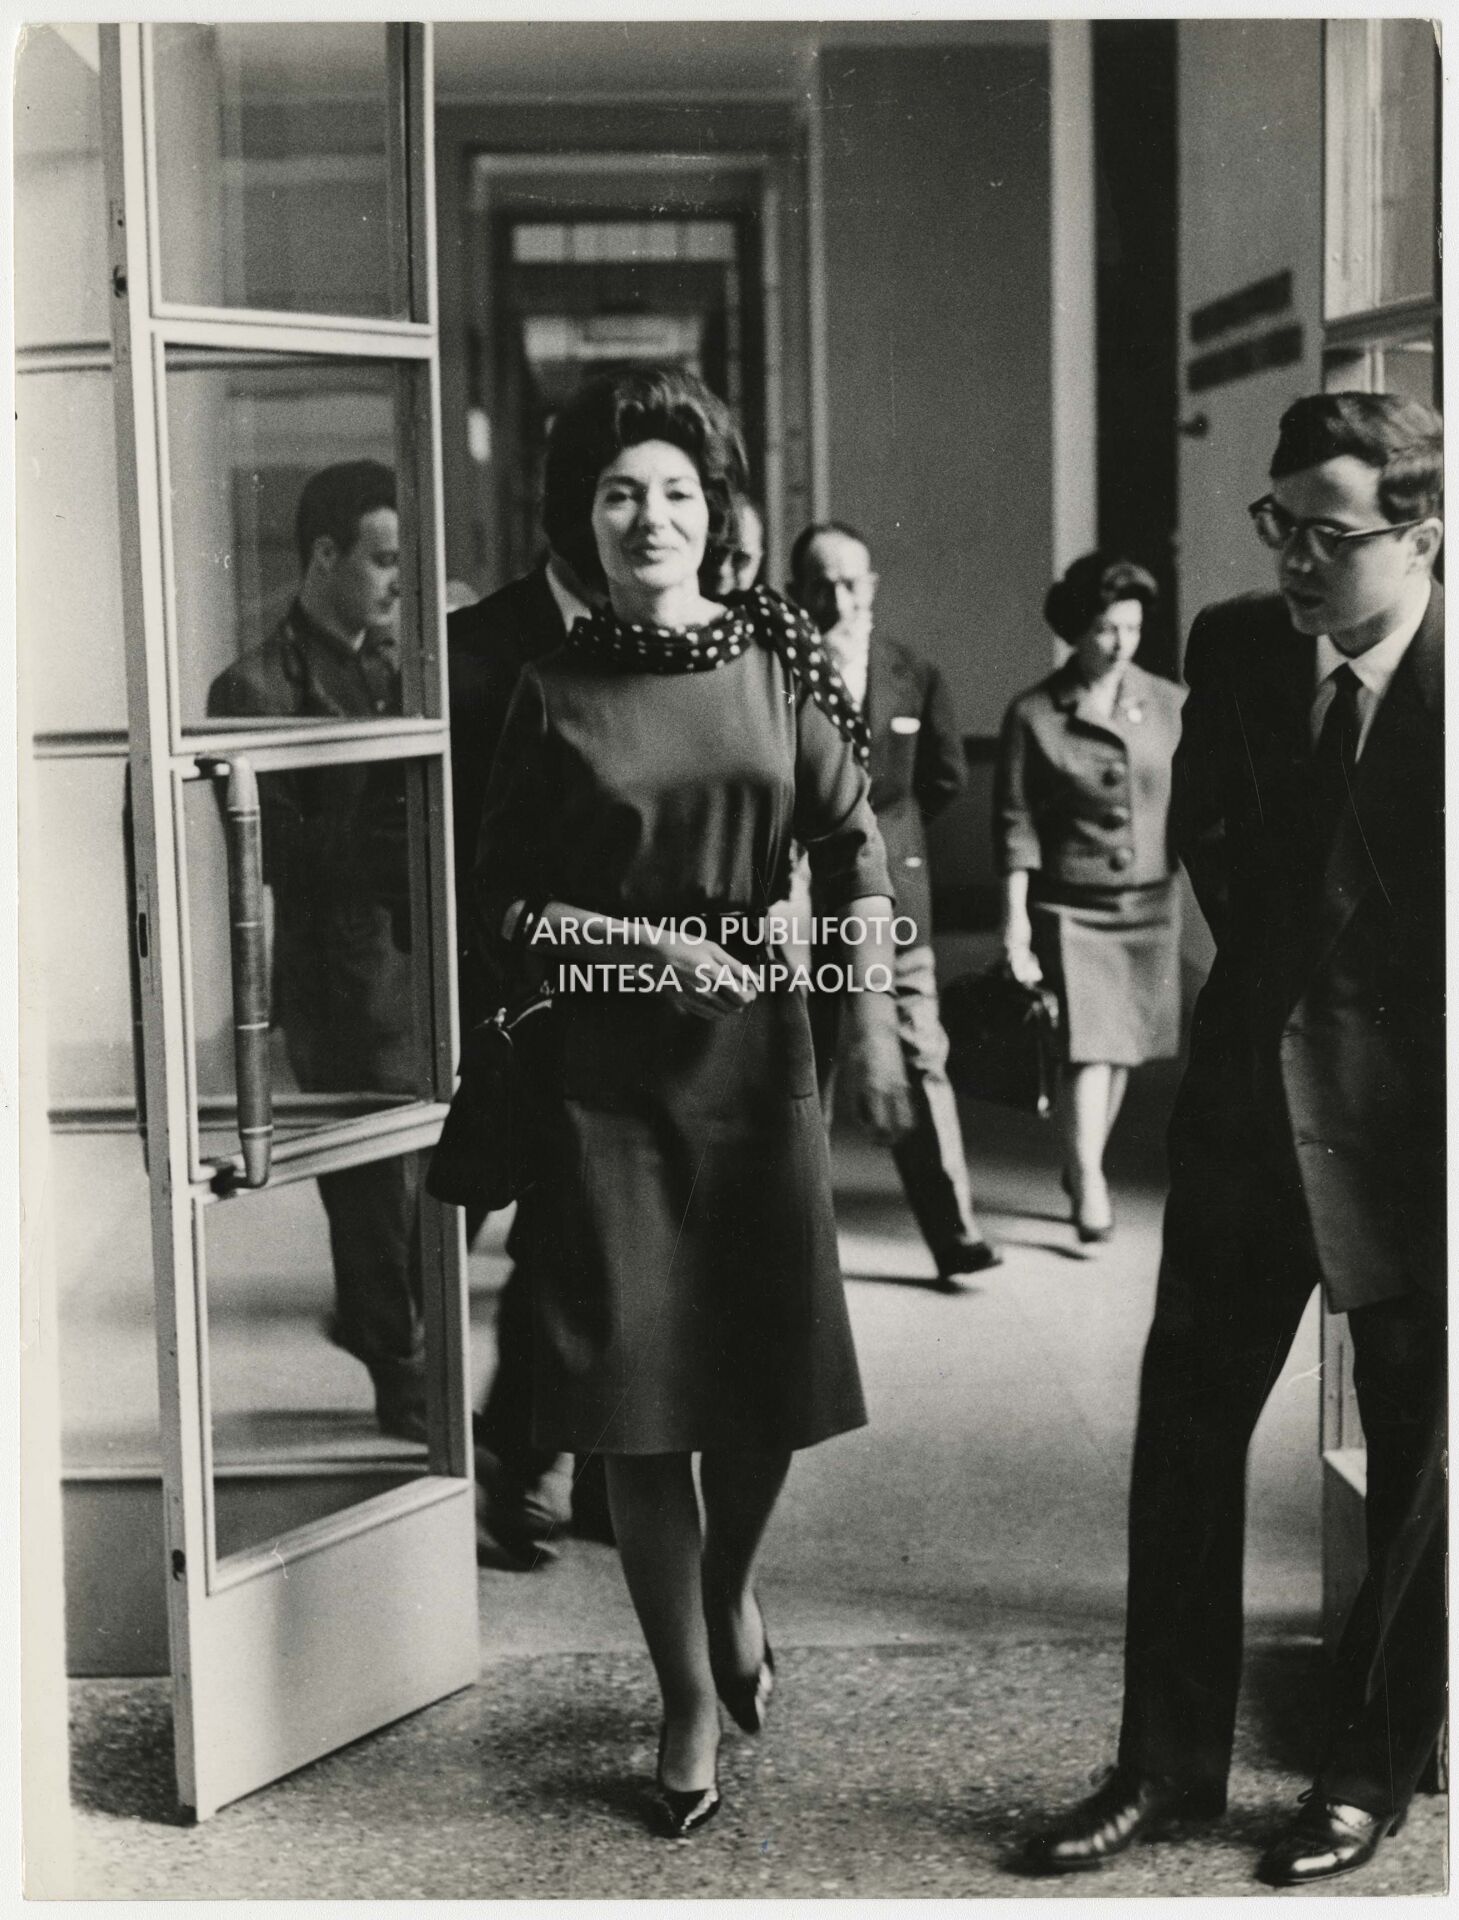 Maria Callas at the Civil Court for questioning regarding her separation